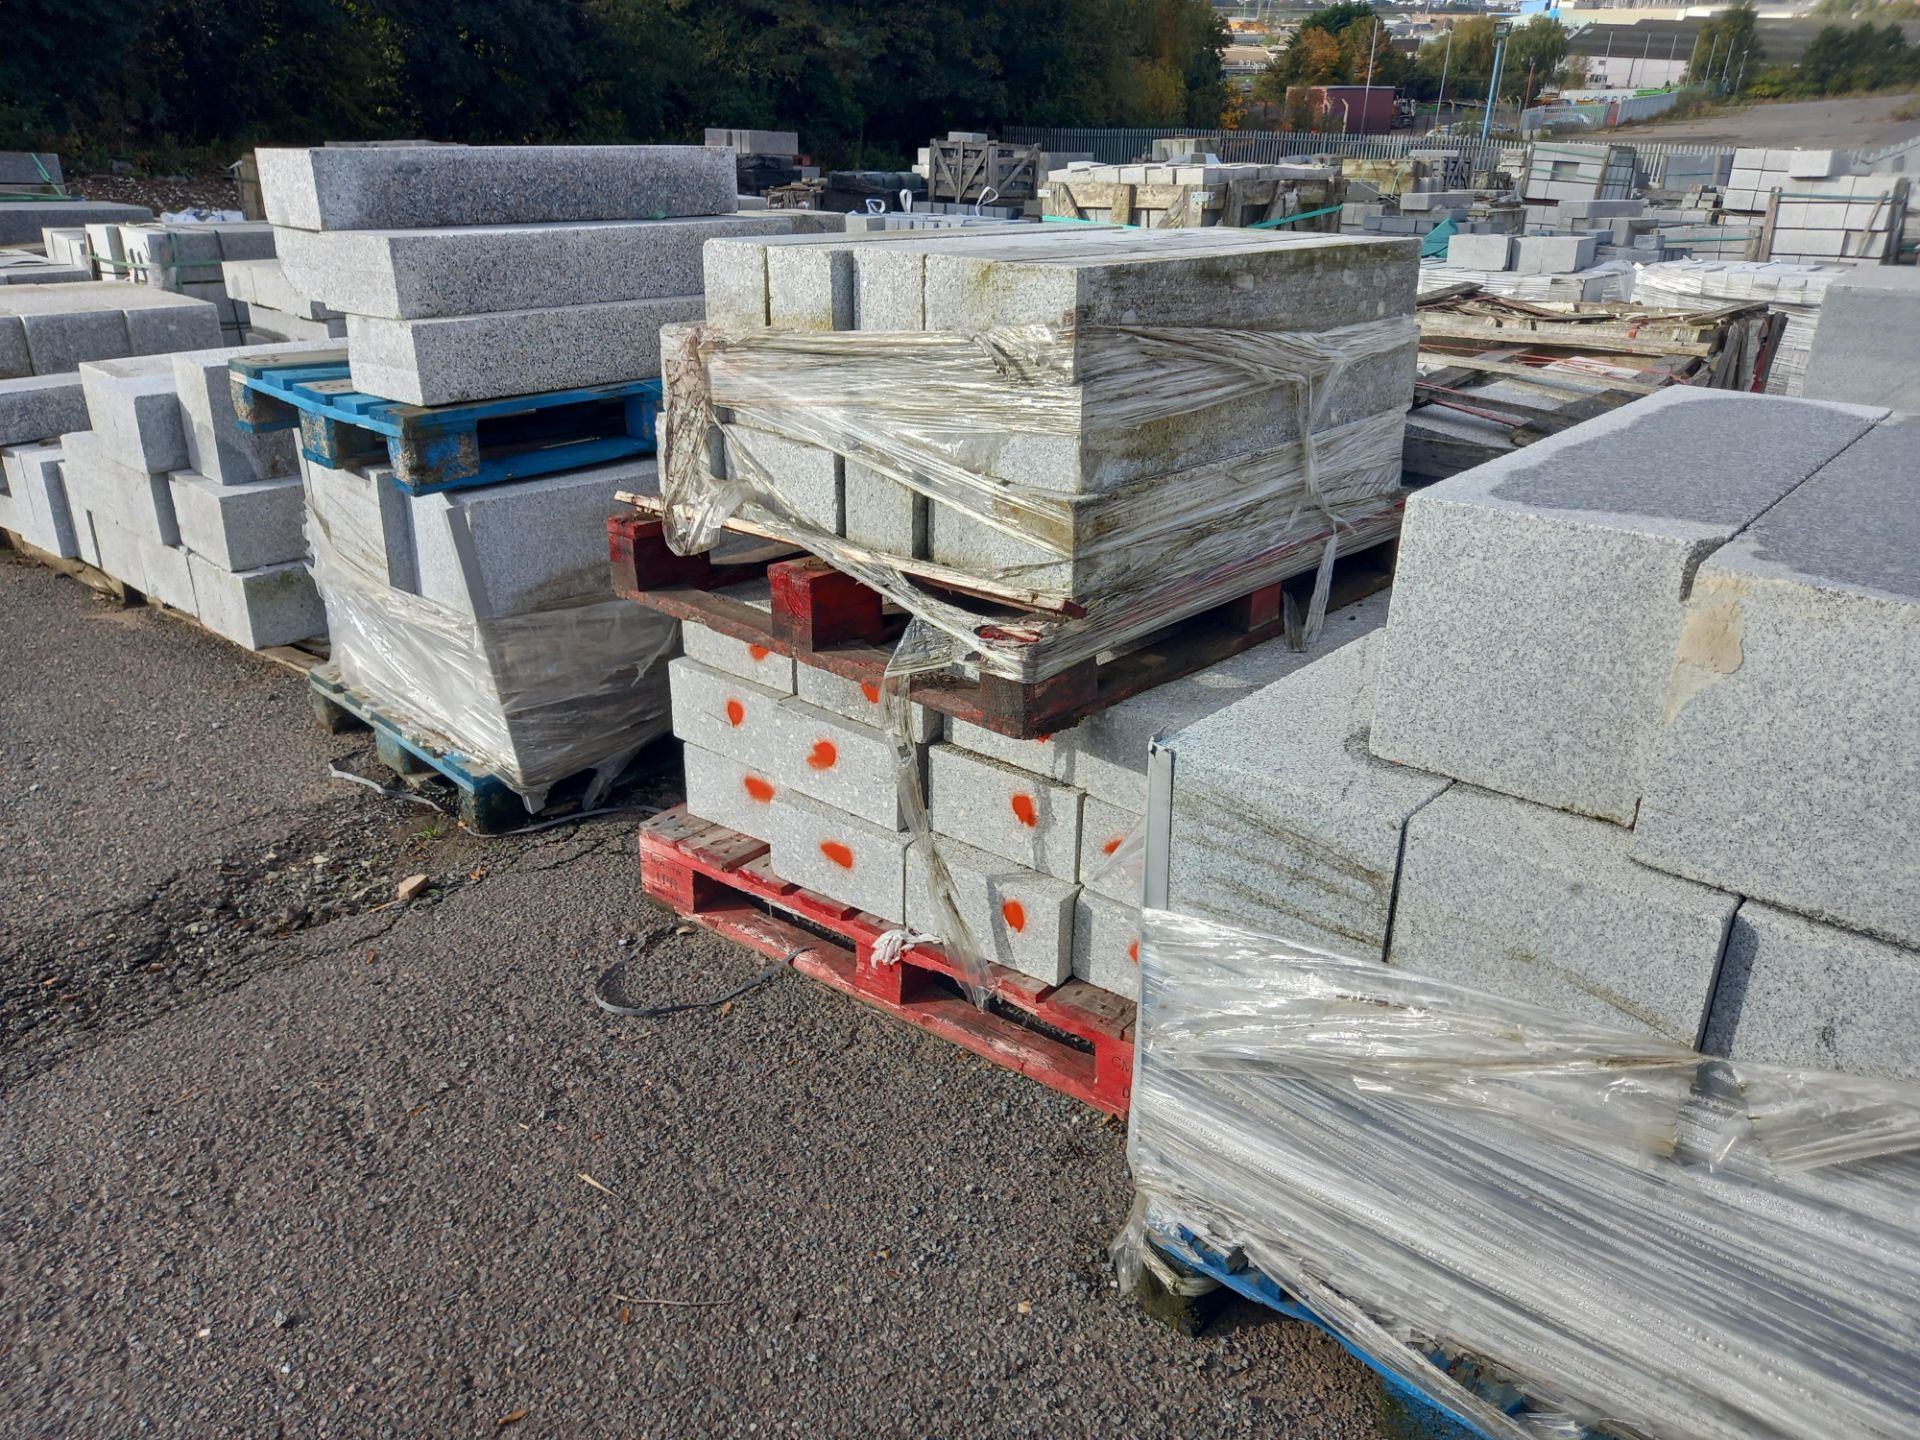 Approx 600 tonnes of granite and other natural stone products for hard landscaping, regeneration, an - Image 67 of 81